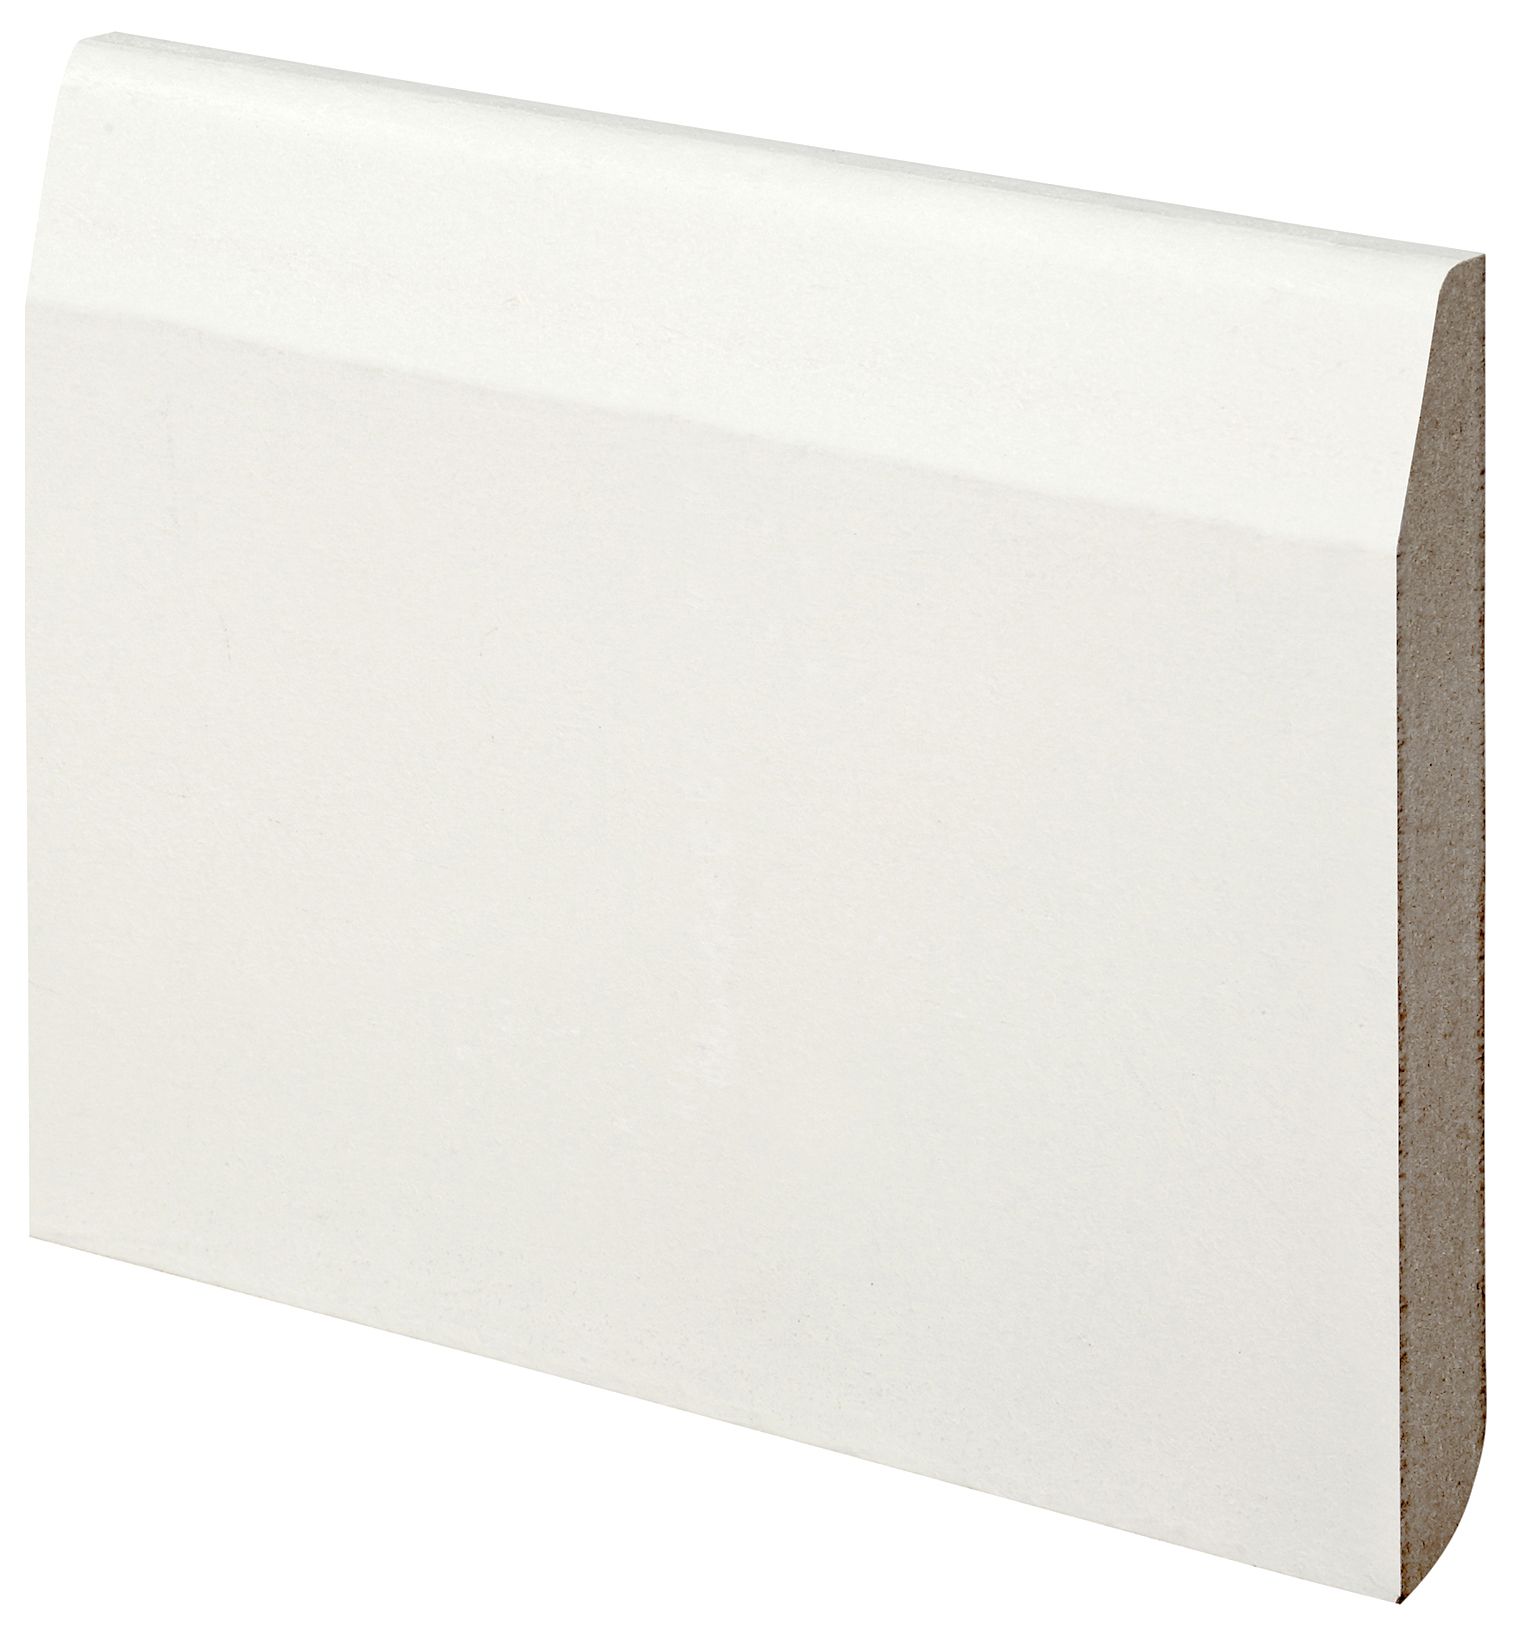 Wickes Dual Purpose Chamfered / Bullnose Primed MDF Skirting - 18 x 119 x 3660 mm